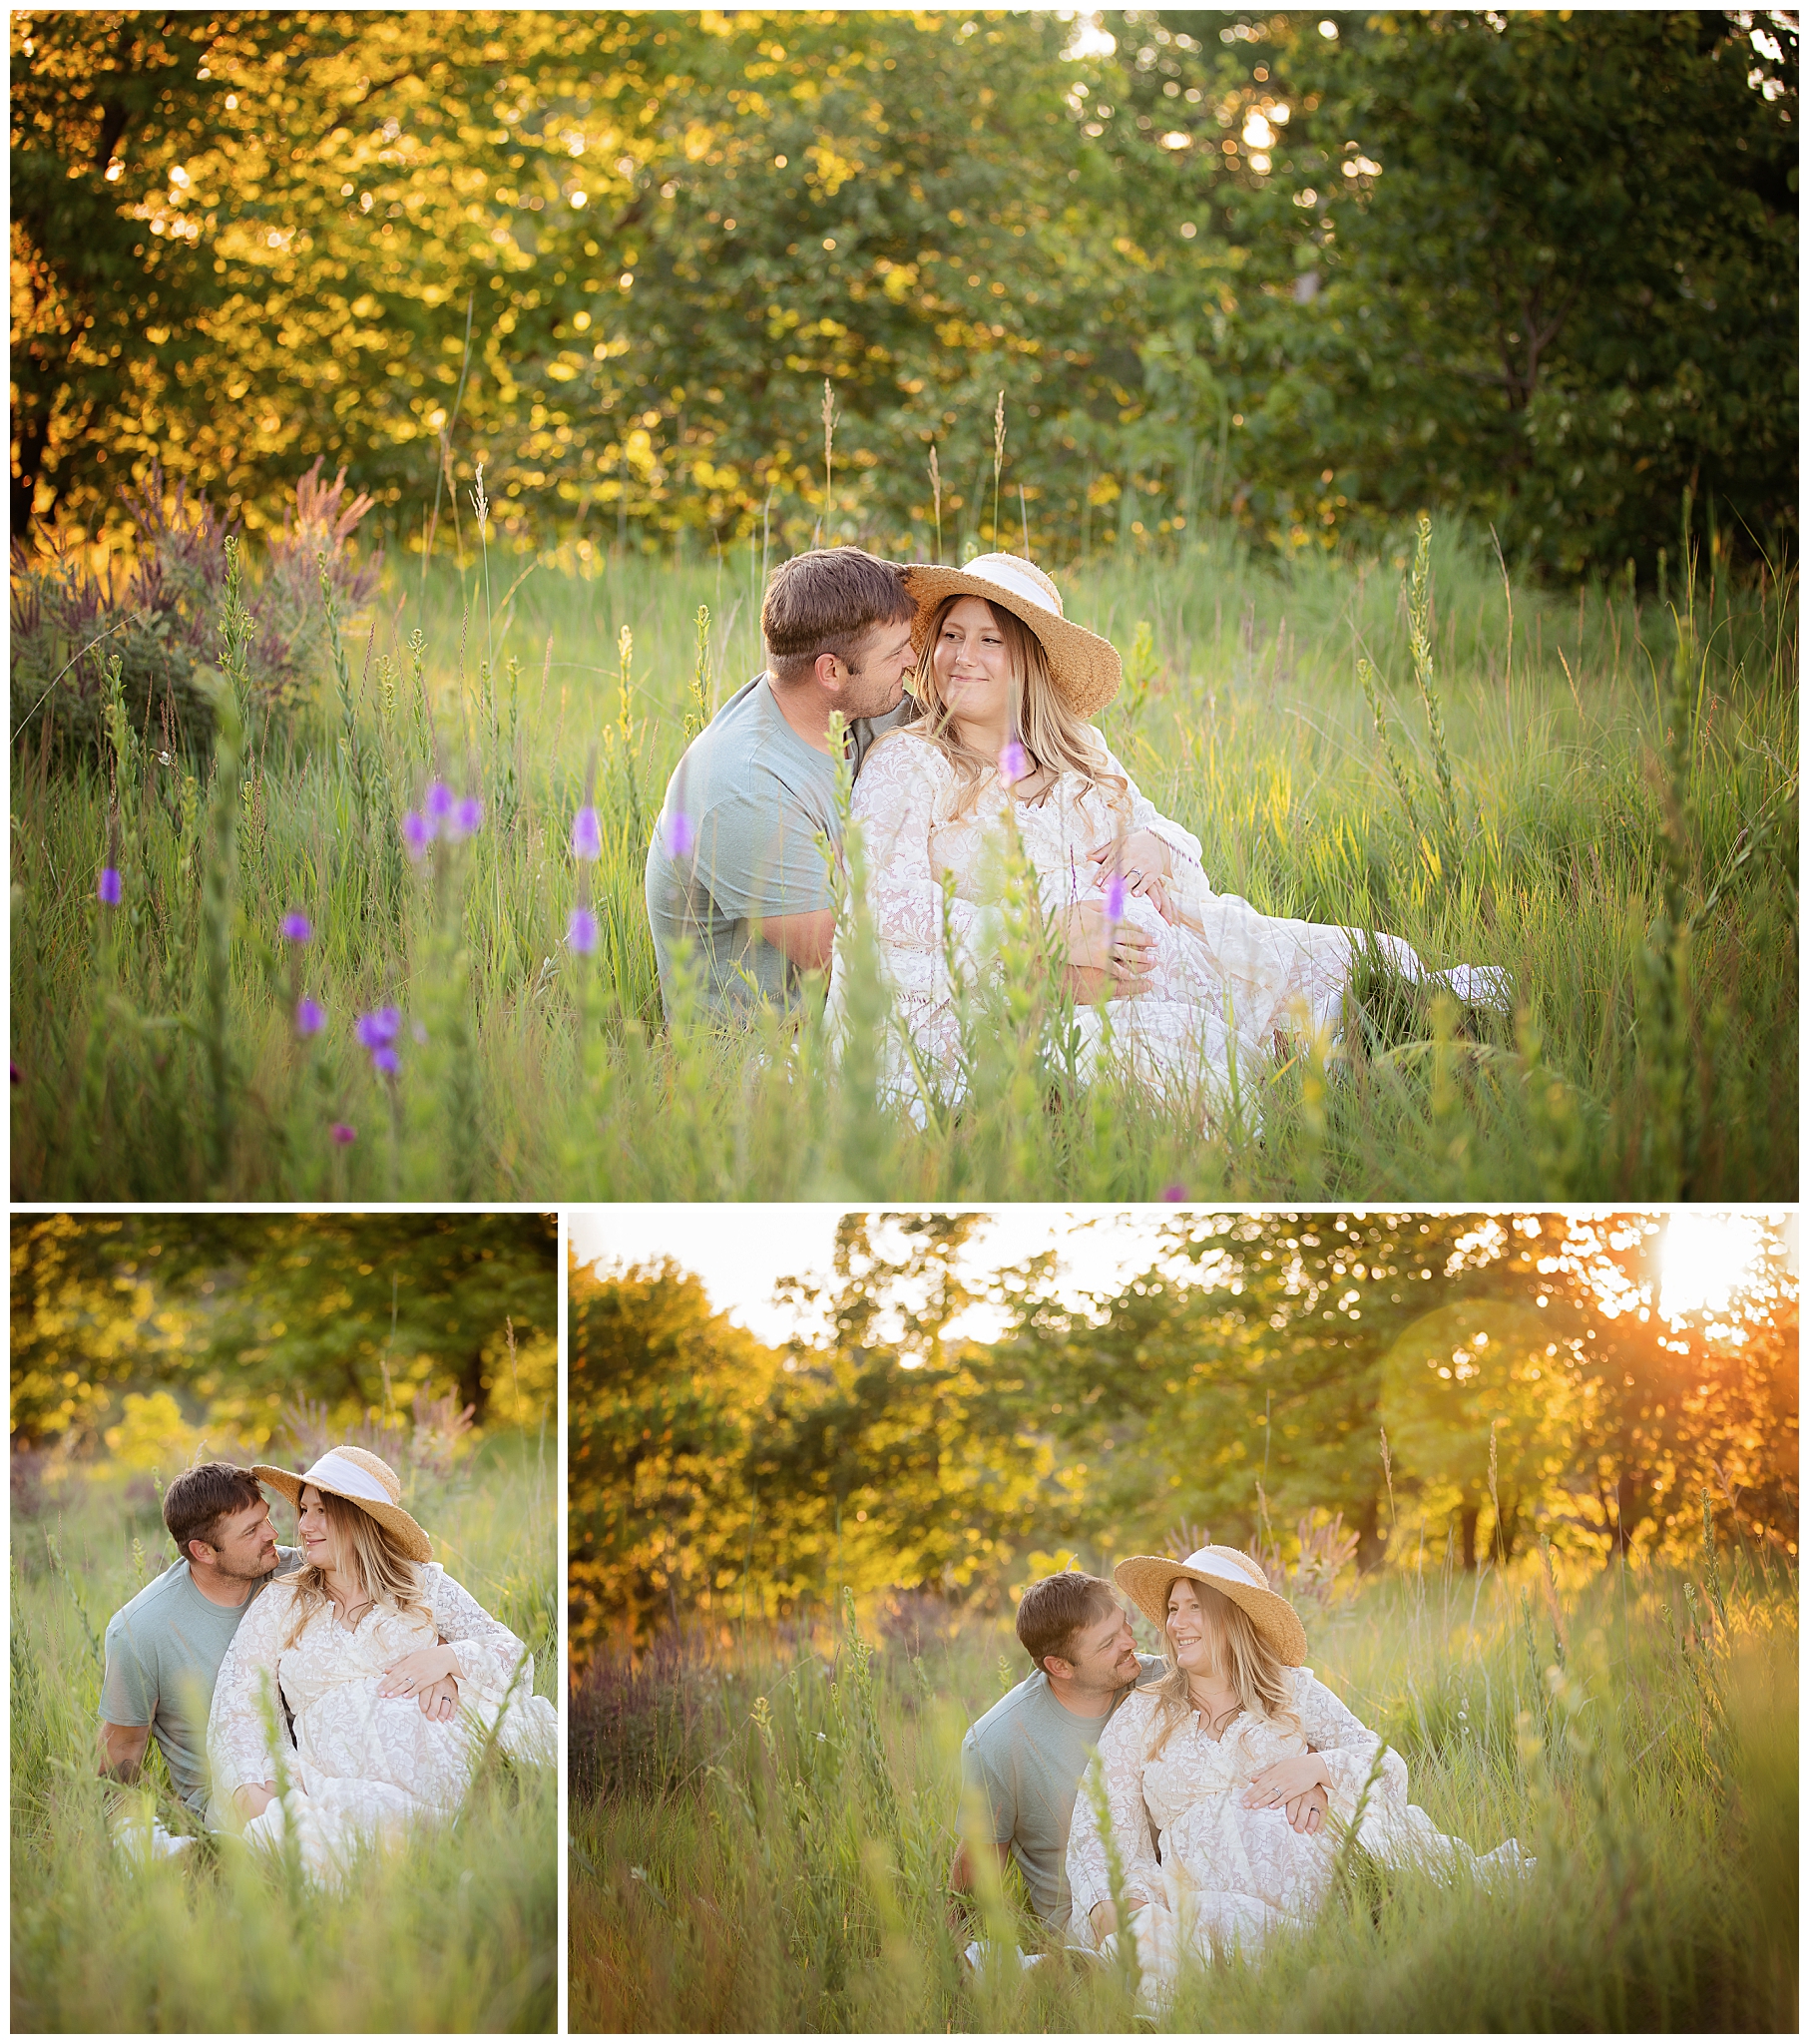 Collage of an outdoor maternity photo shoot in New Ulm, Minnesota.